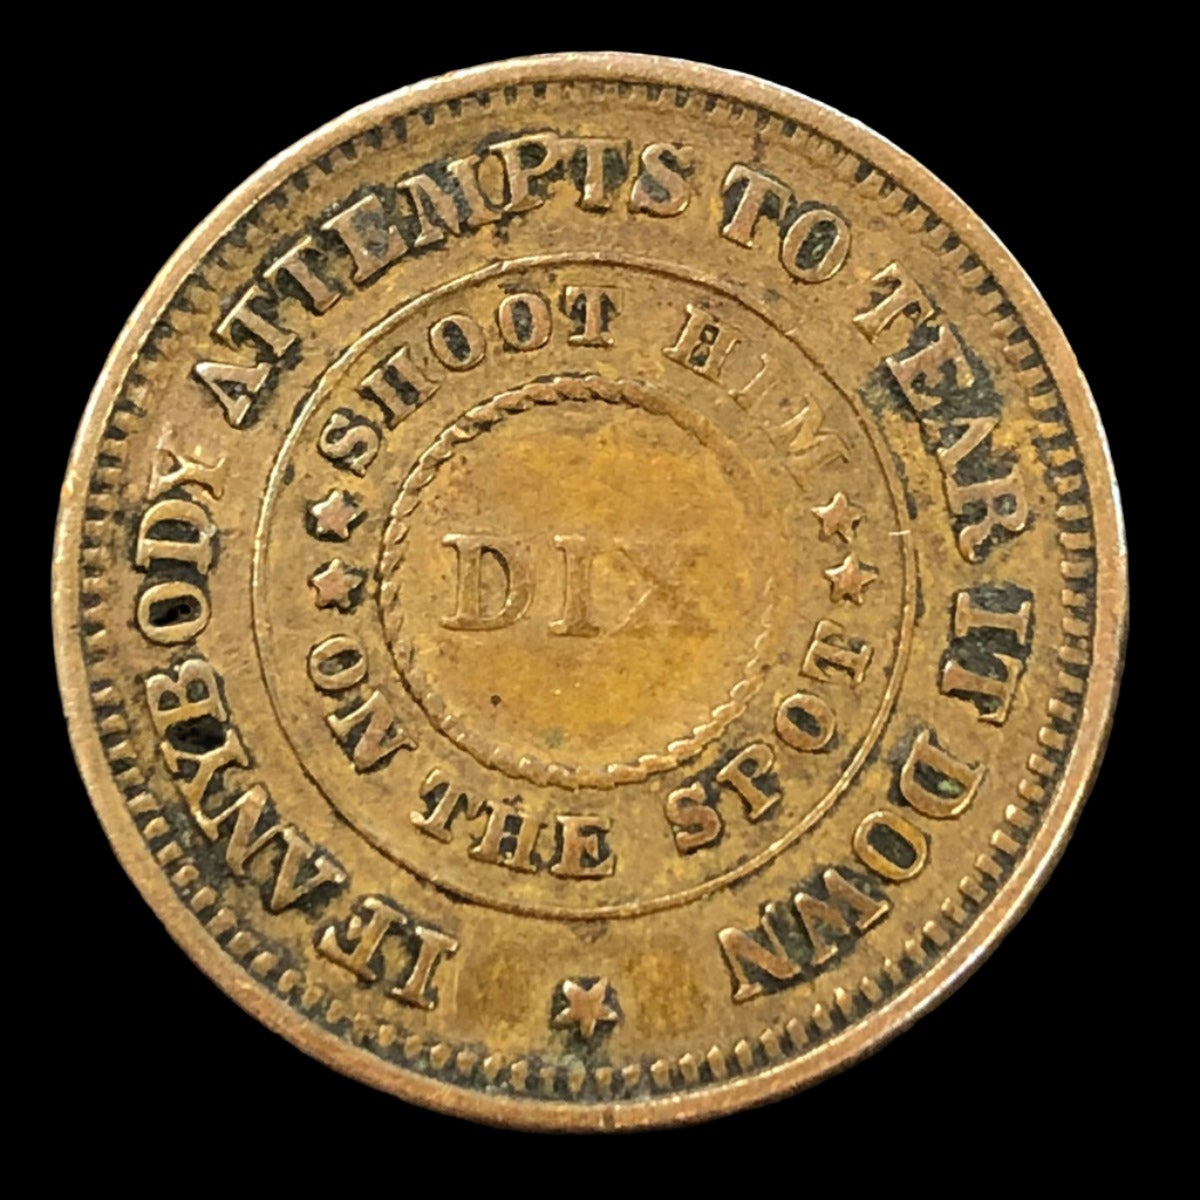 1863 Patriotic Civil War Token “The Flag Of Our Union / Dix Shoot Him On The Spot”